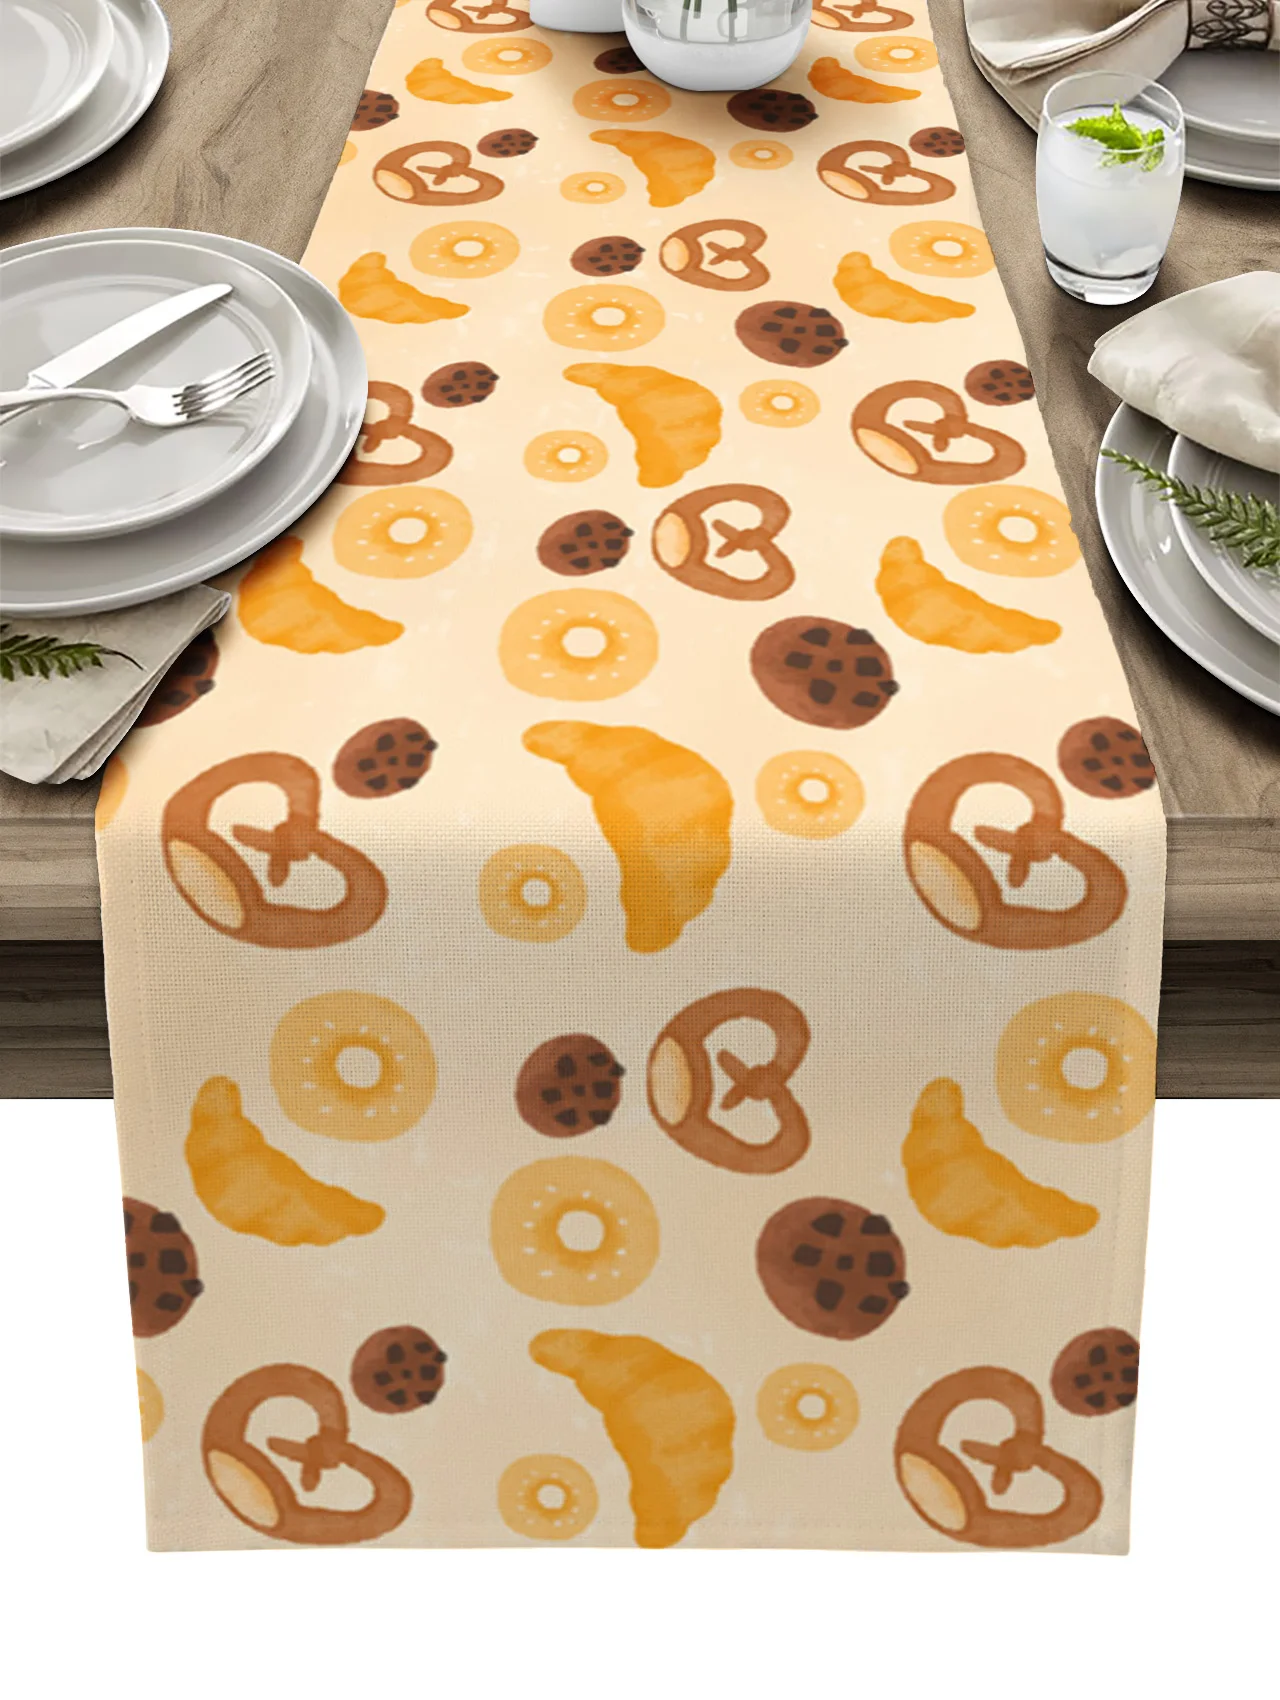 

Kitchen Elements Bread Donuts Retro Table Runner Kitchen Dining Table Decor Tablecloth Wedding Holiday Decor Table Runner